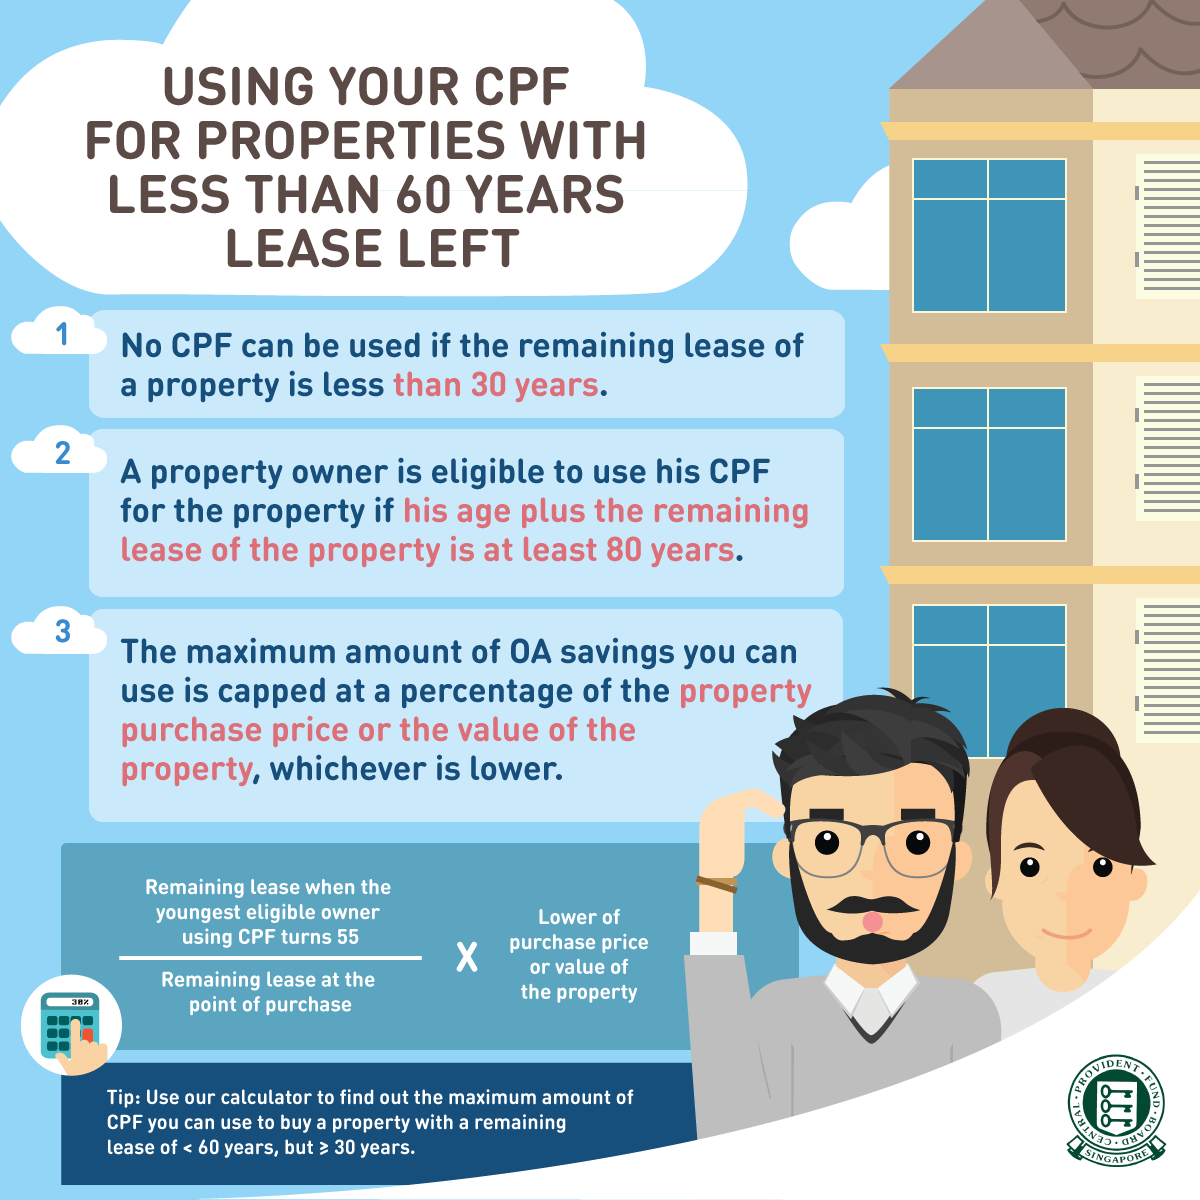 Resale Home Buying Guide - CPF restrictions